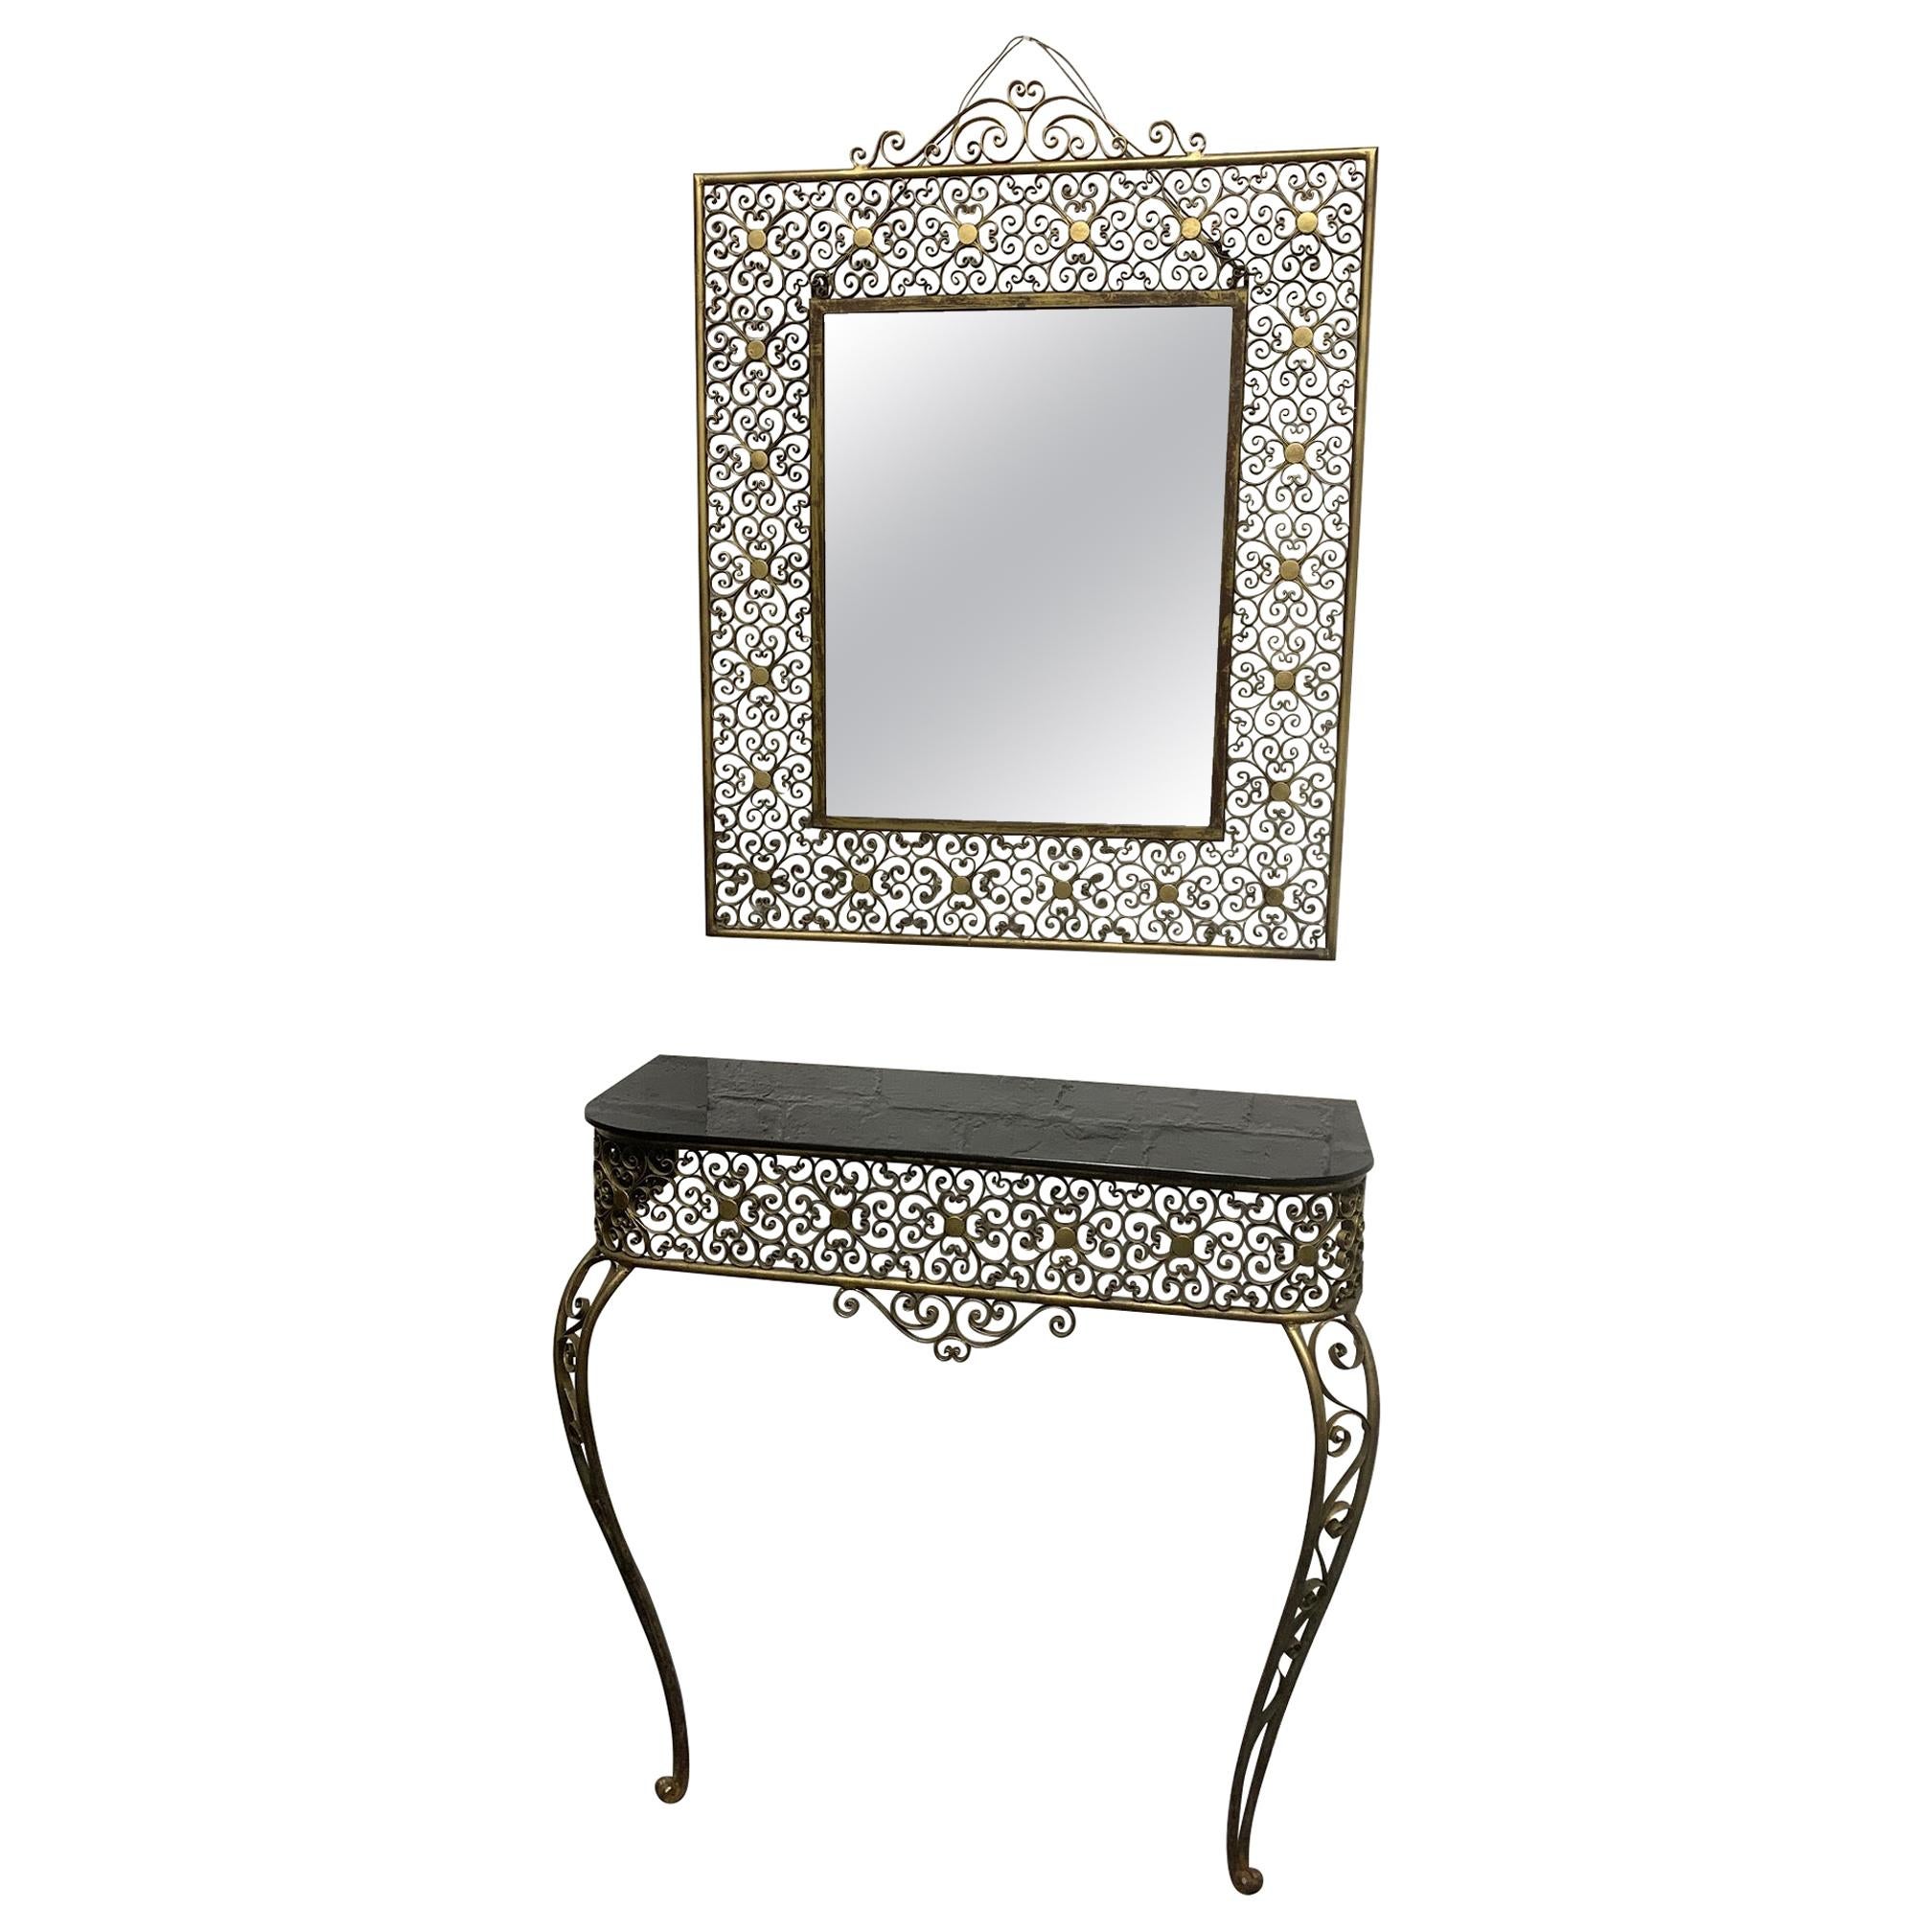 Art Deco Console Table with Matching Mirror Attributed to Oscar Bach